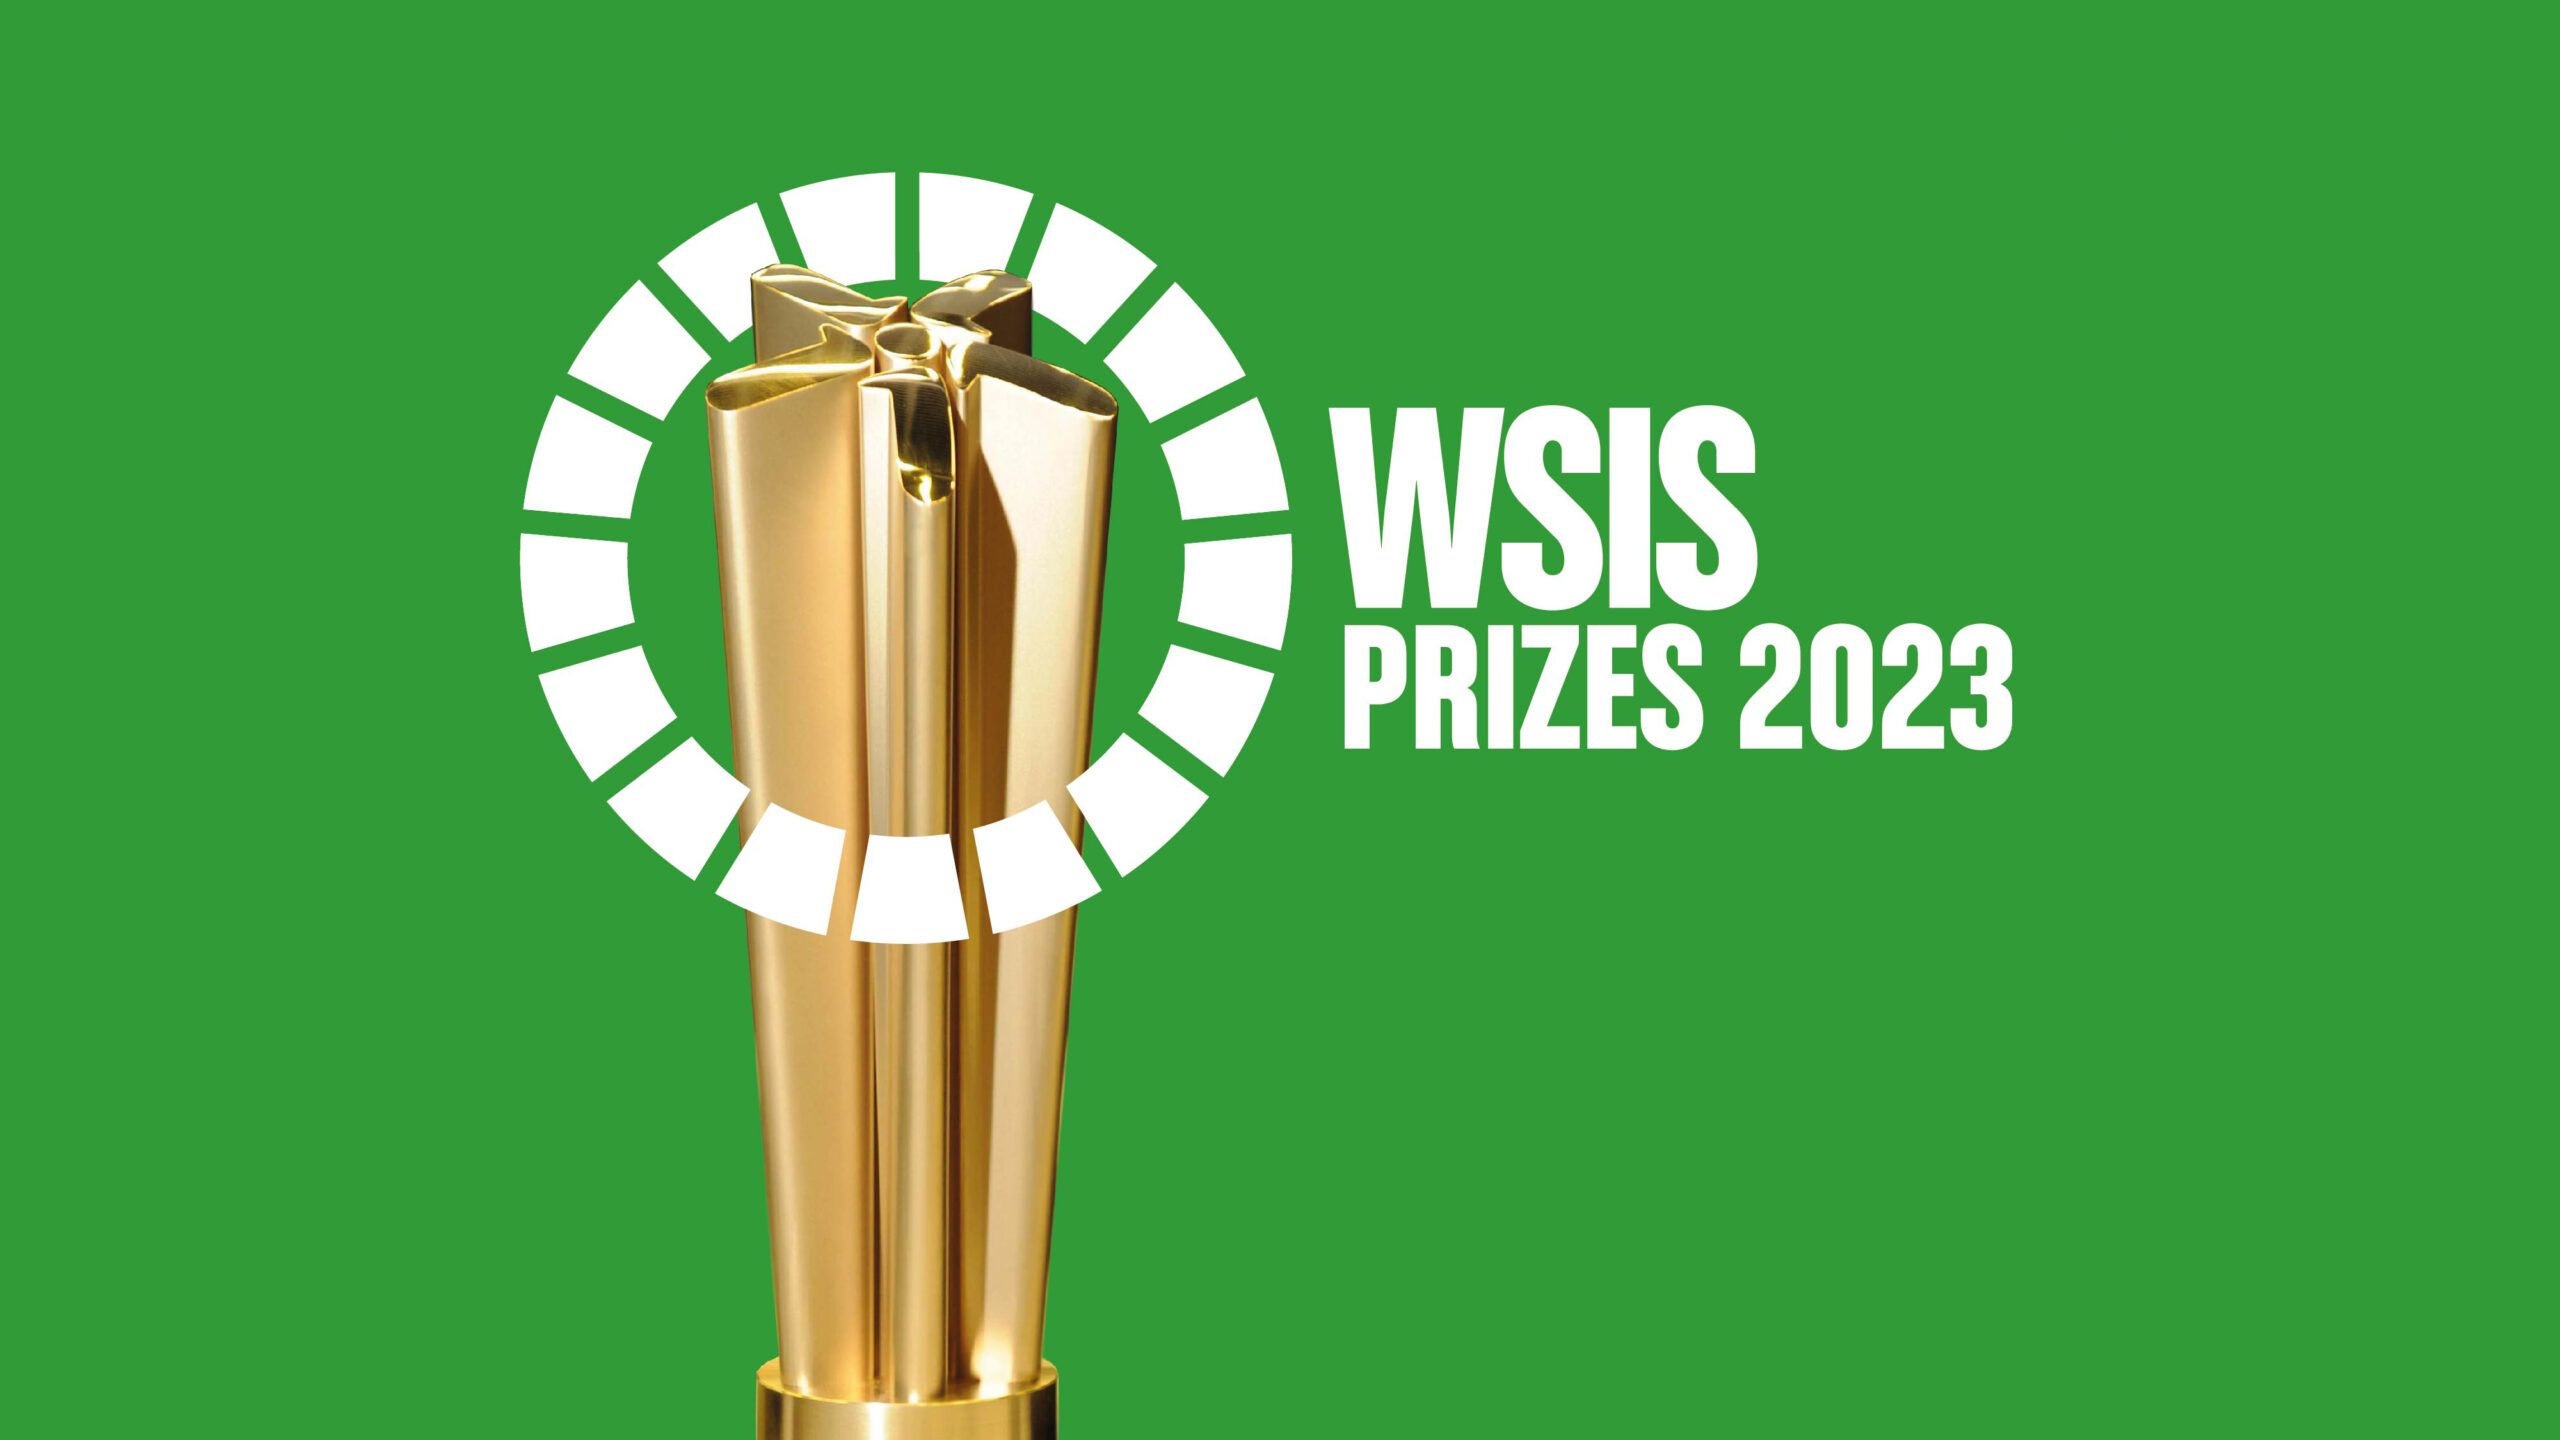 WSIS Prizes 2023: Winning projects drive digital action featured image